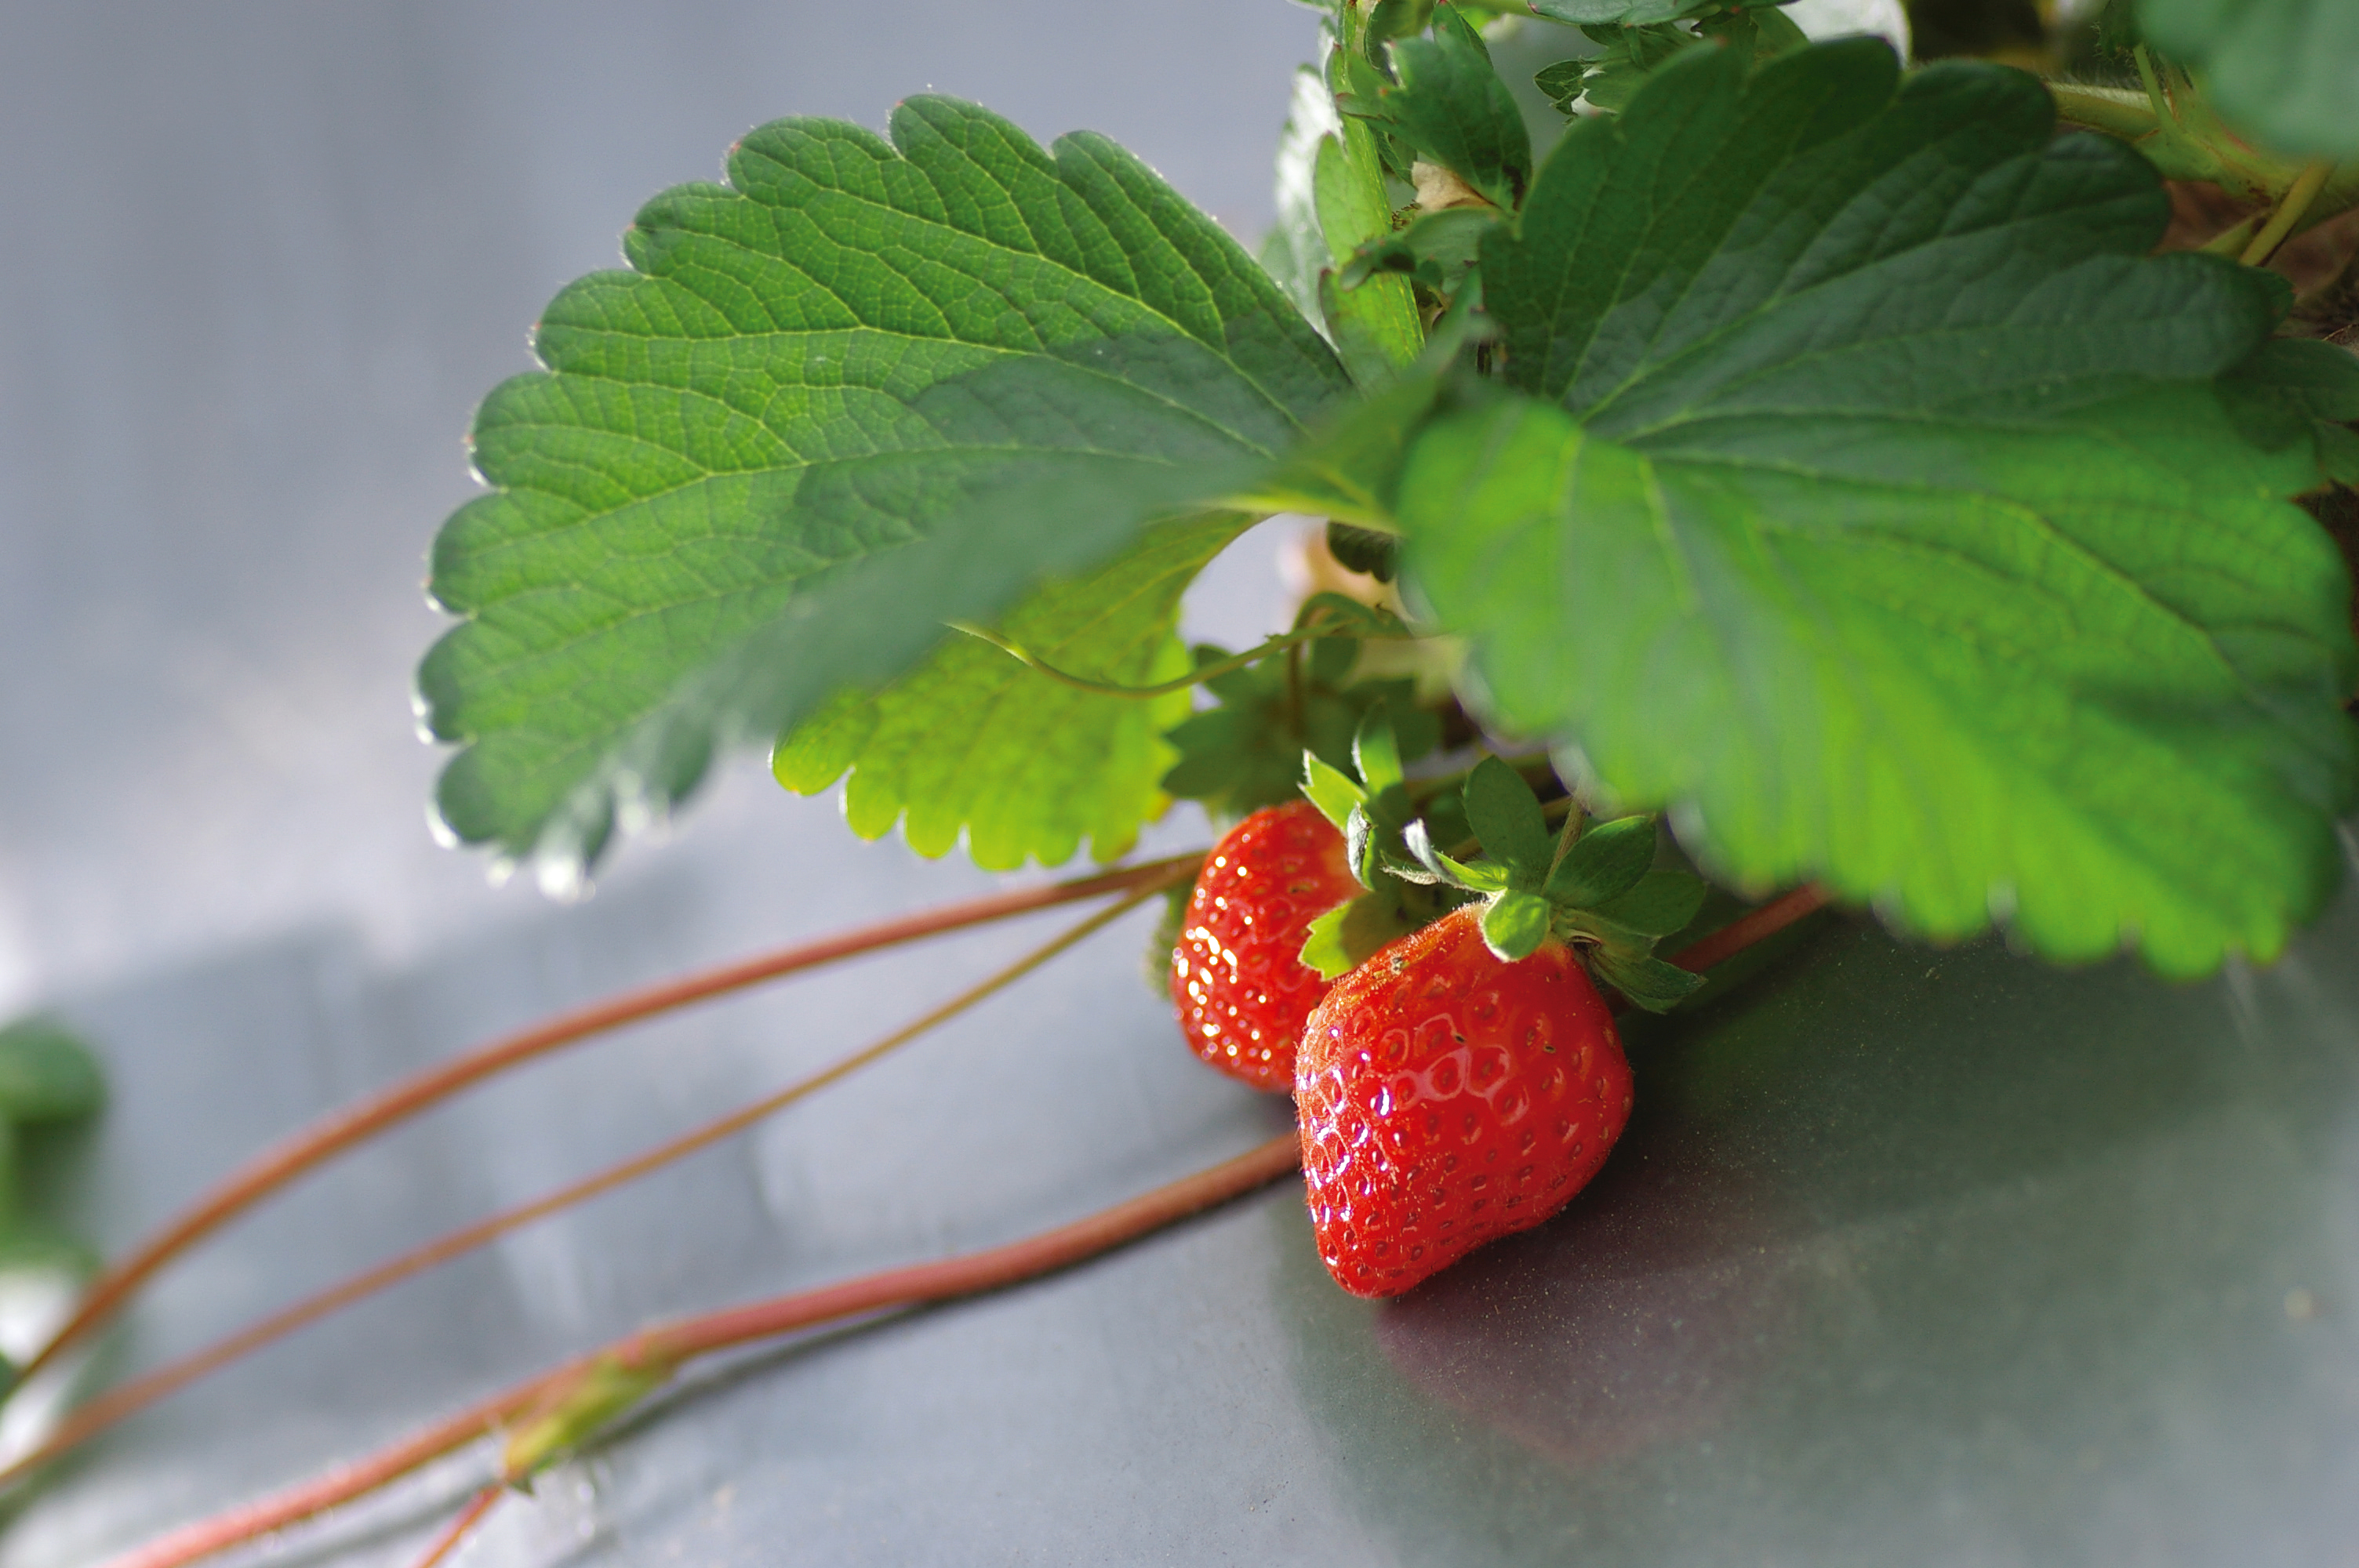 December is the strawberry month in Dahu